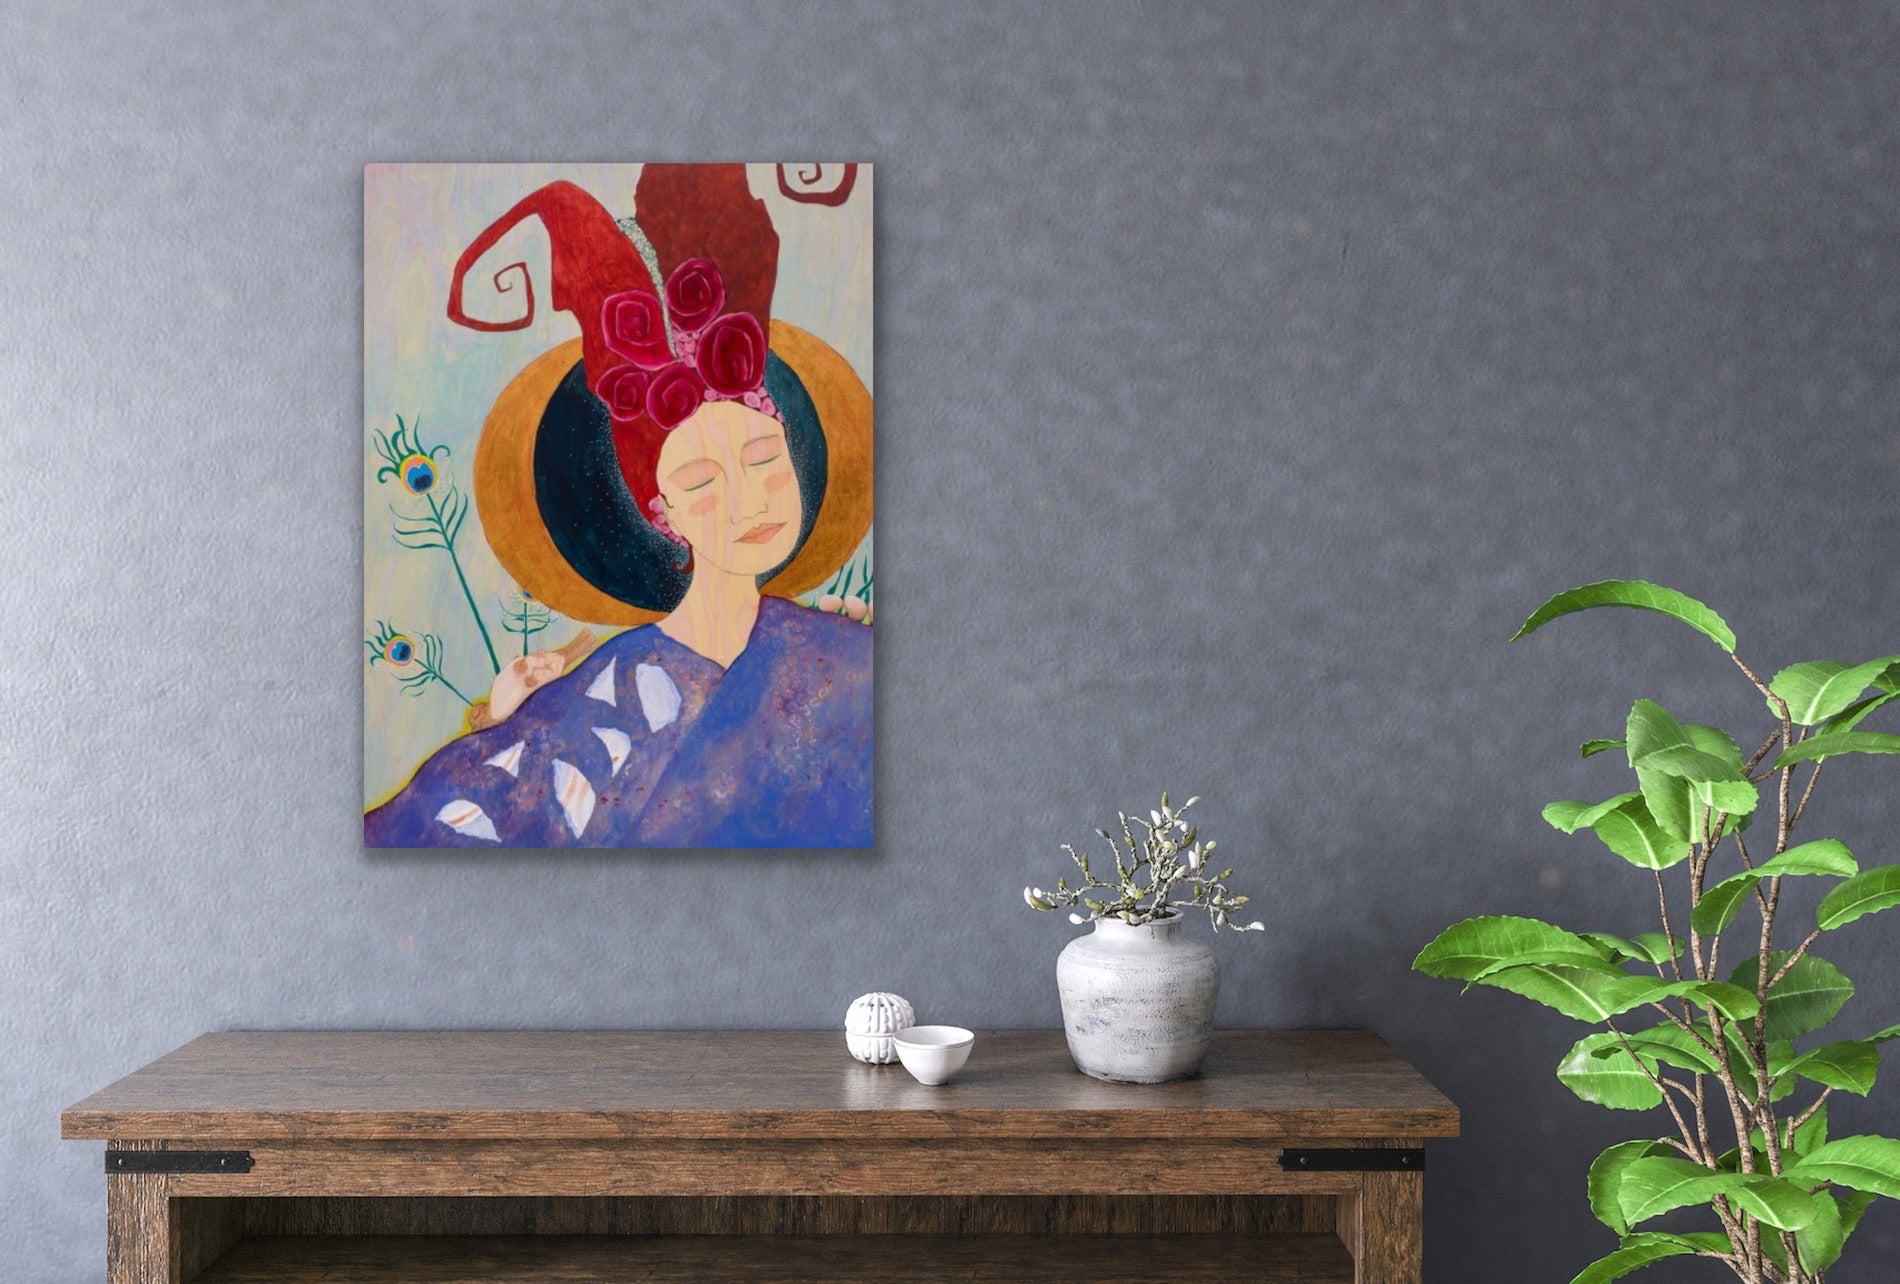 spiritual artwork showing a whimsical woman with flowers in her hair and a bird and eggs on her shoulders in a hallway entryway